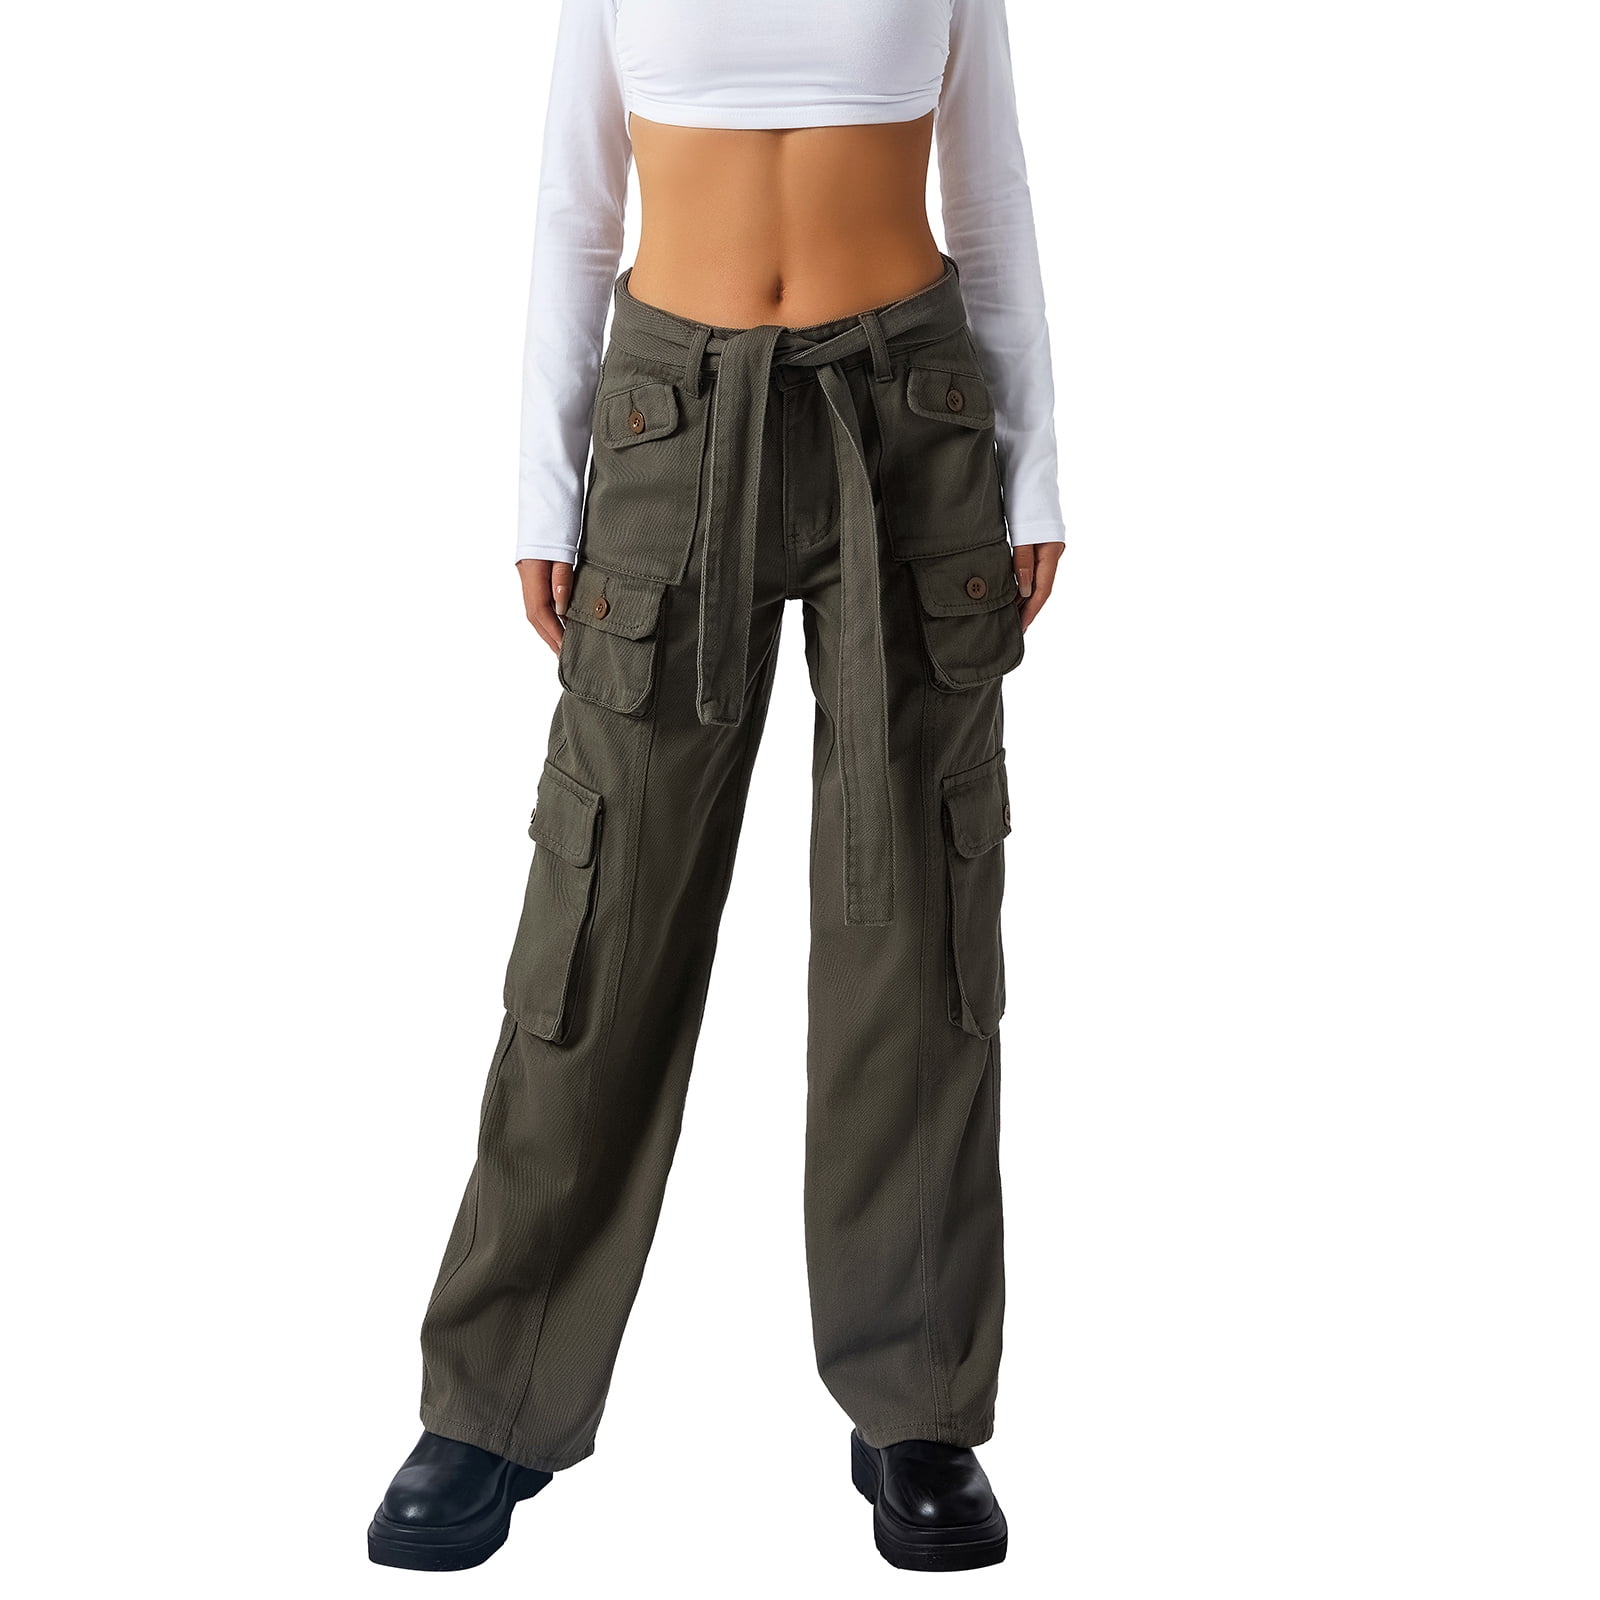 Trendy Soft Crop Top and Flare Pants Set in Grey - Retro, Indie and Unique  Fashion